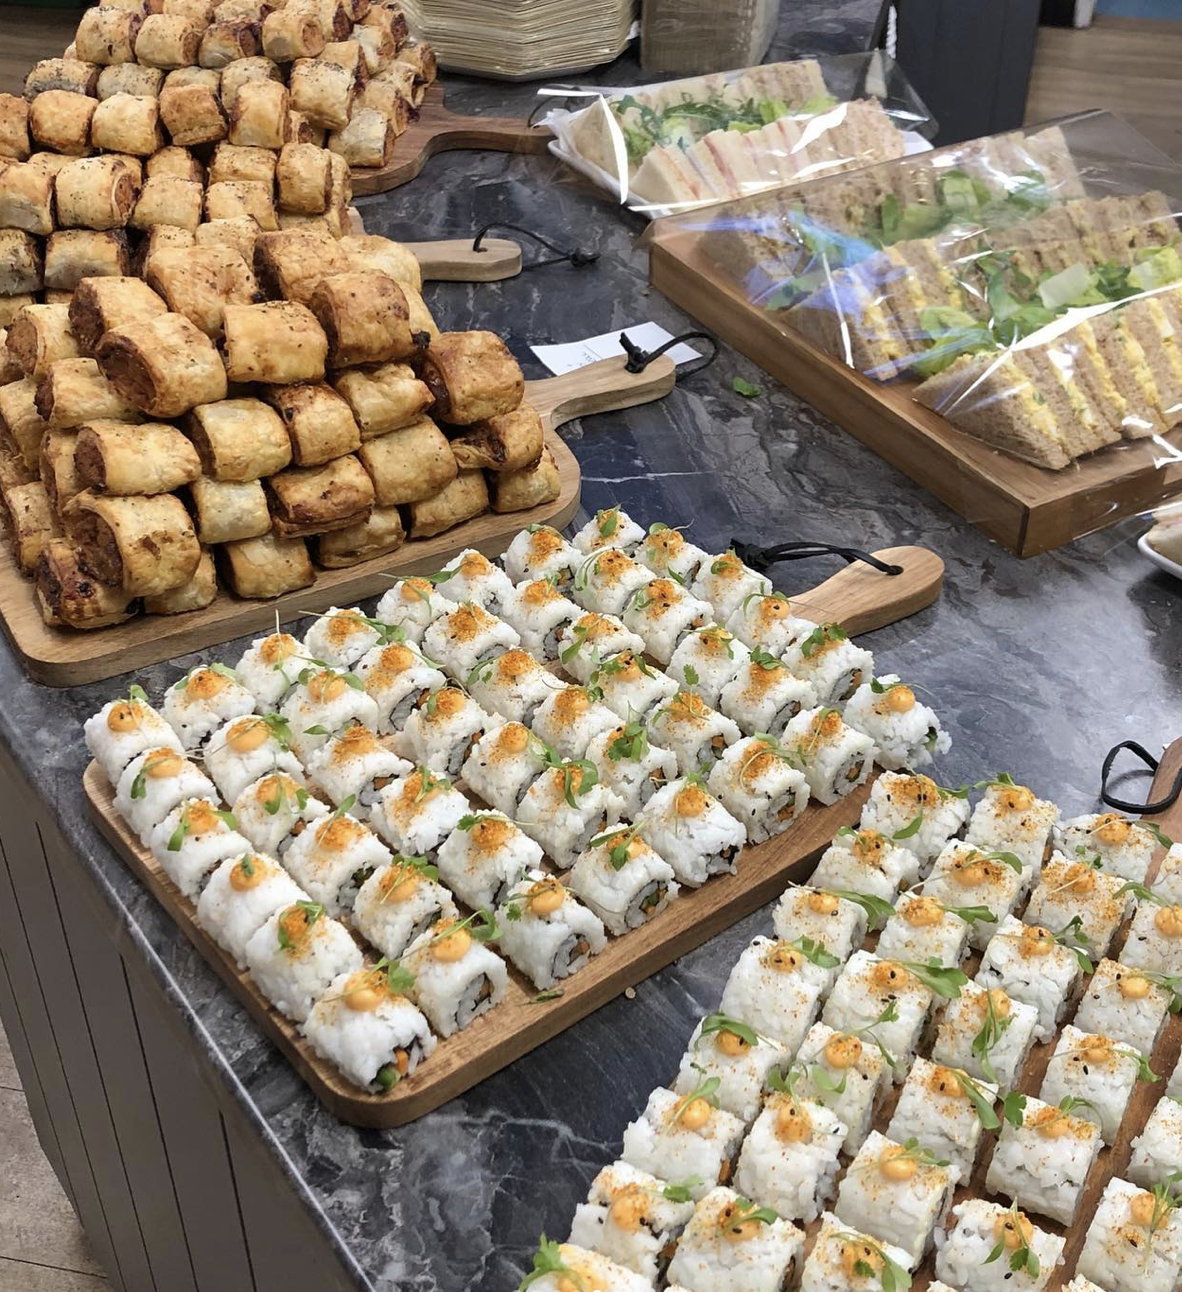 David's also thanked @vutiebeets for catering - the sushi, vegan sausage rolls and cake were delicious. CREDIT: David's bookshop